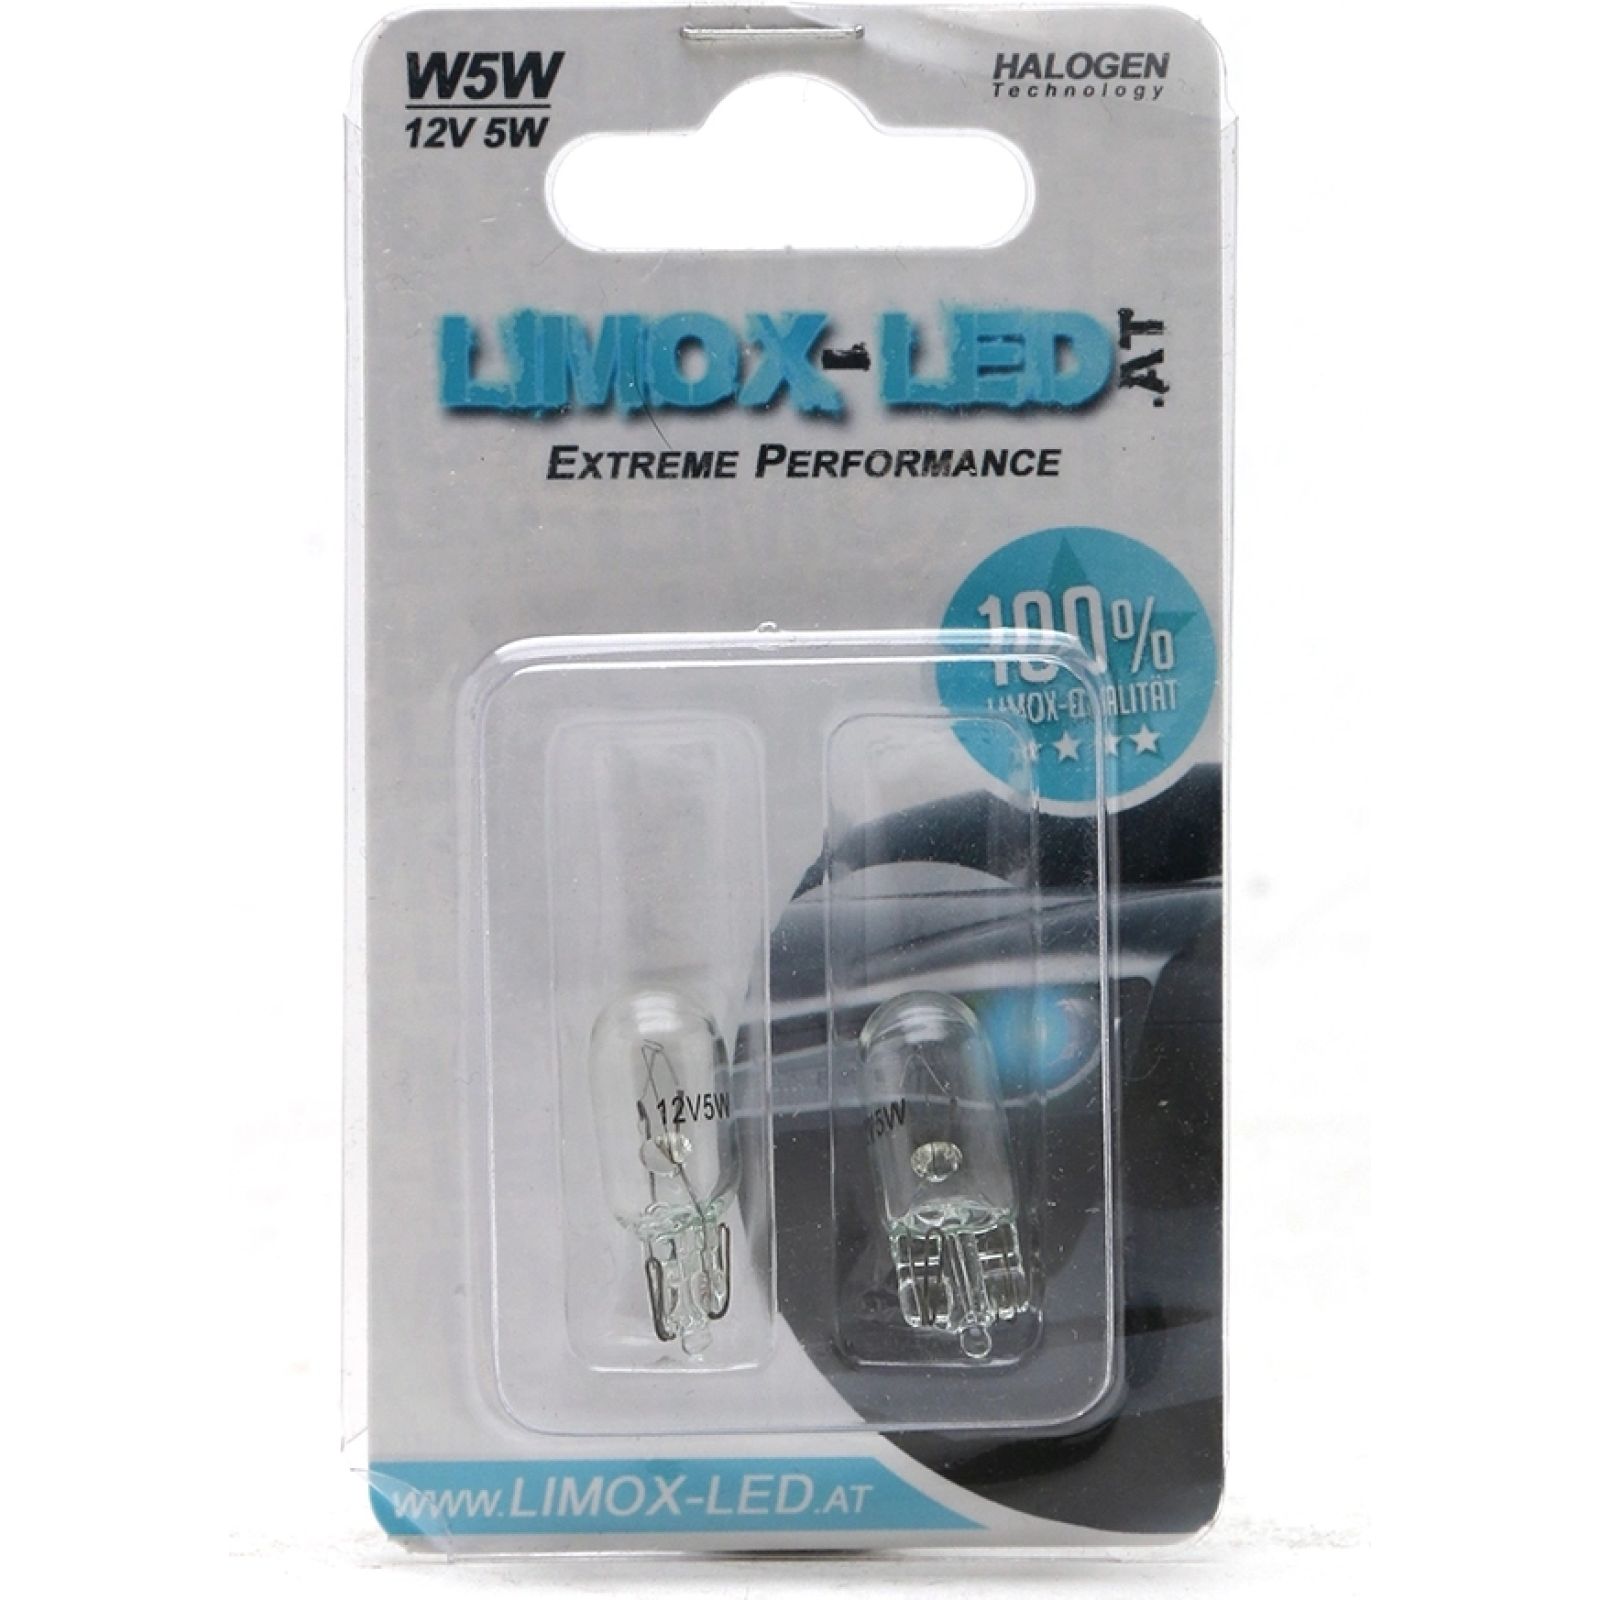 https://www.autoteile-store.at/img/product/2-stueck-halogen-lampen-t10-w5w-5-watt-120002-327901/cf4e8ff8c843c36764a97e28f565bd95_1600.jpg